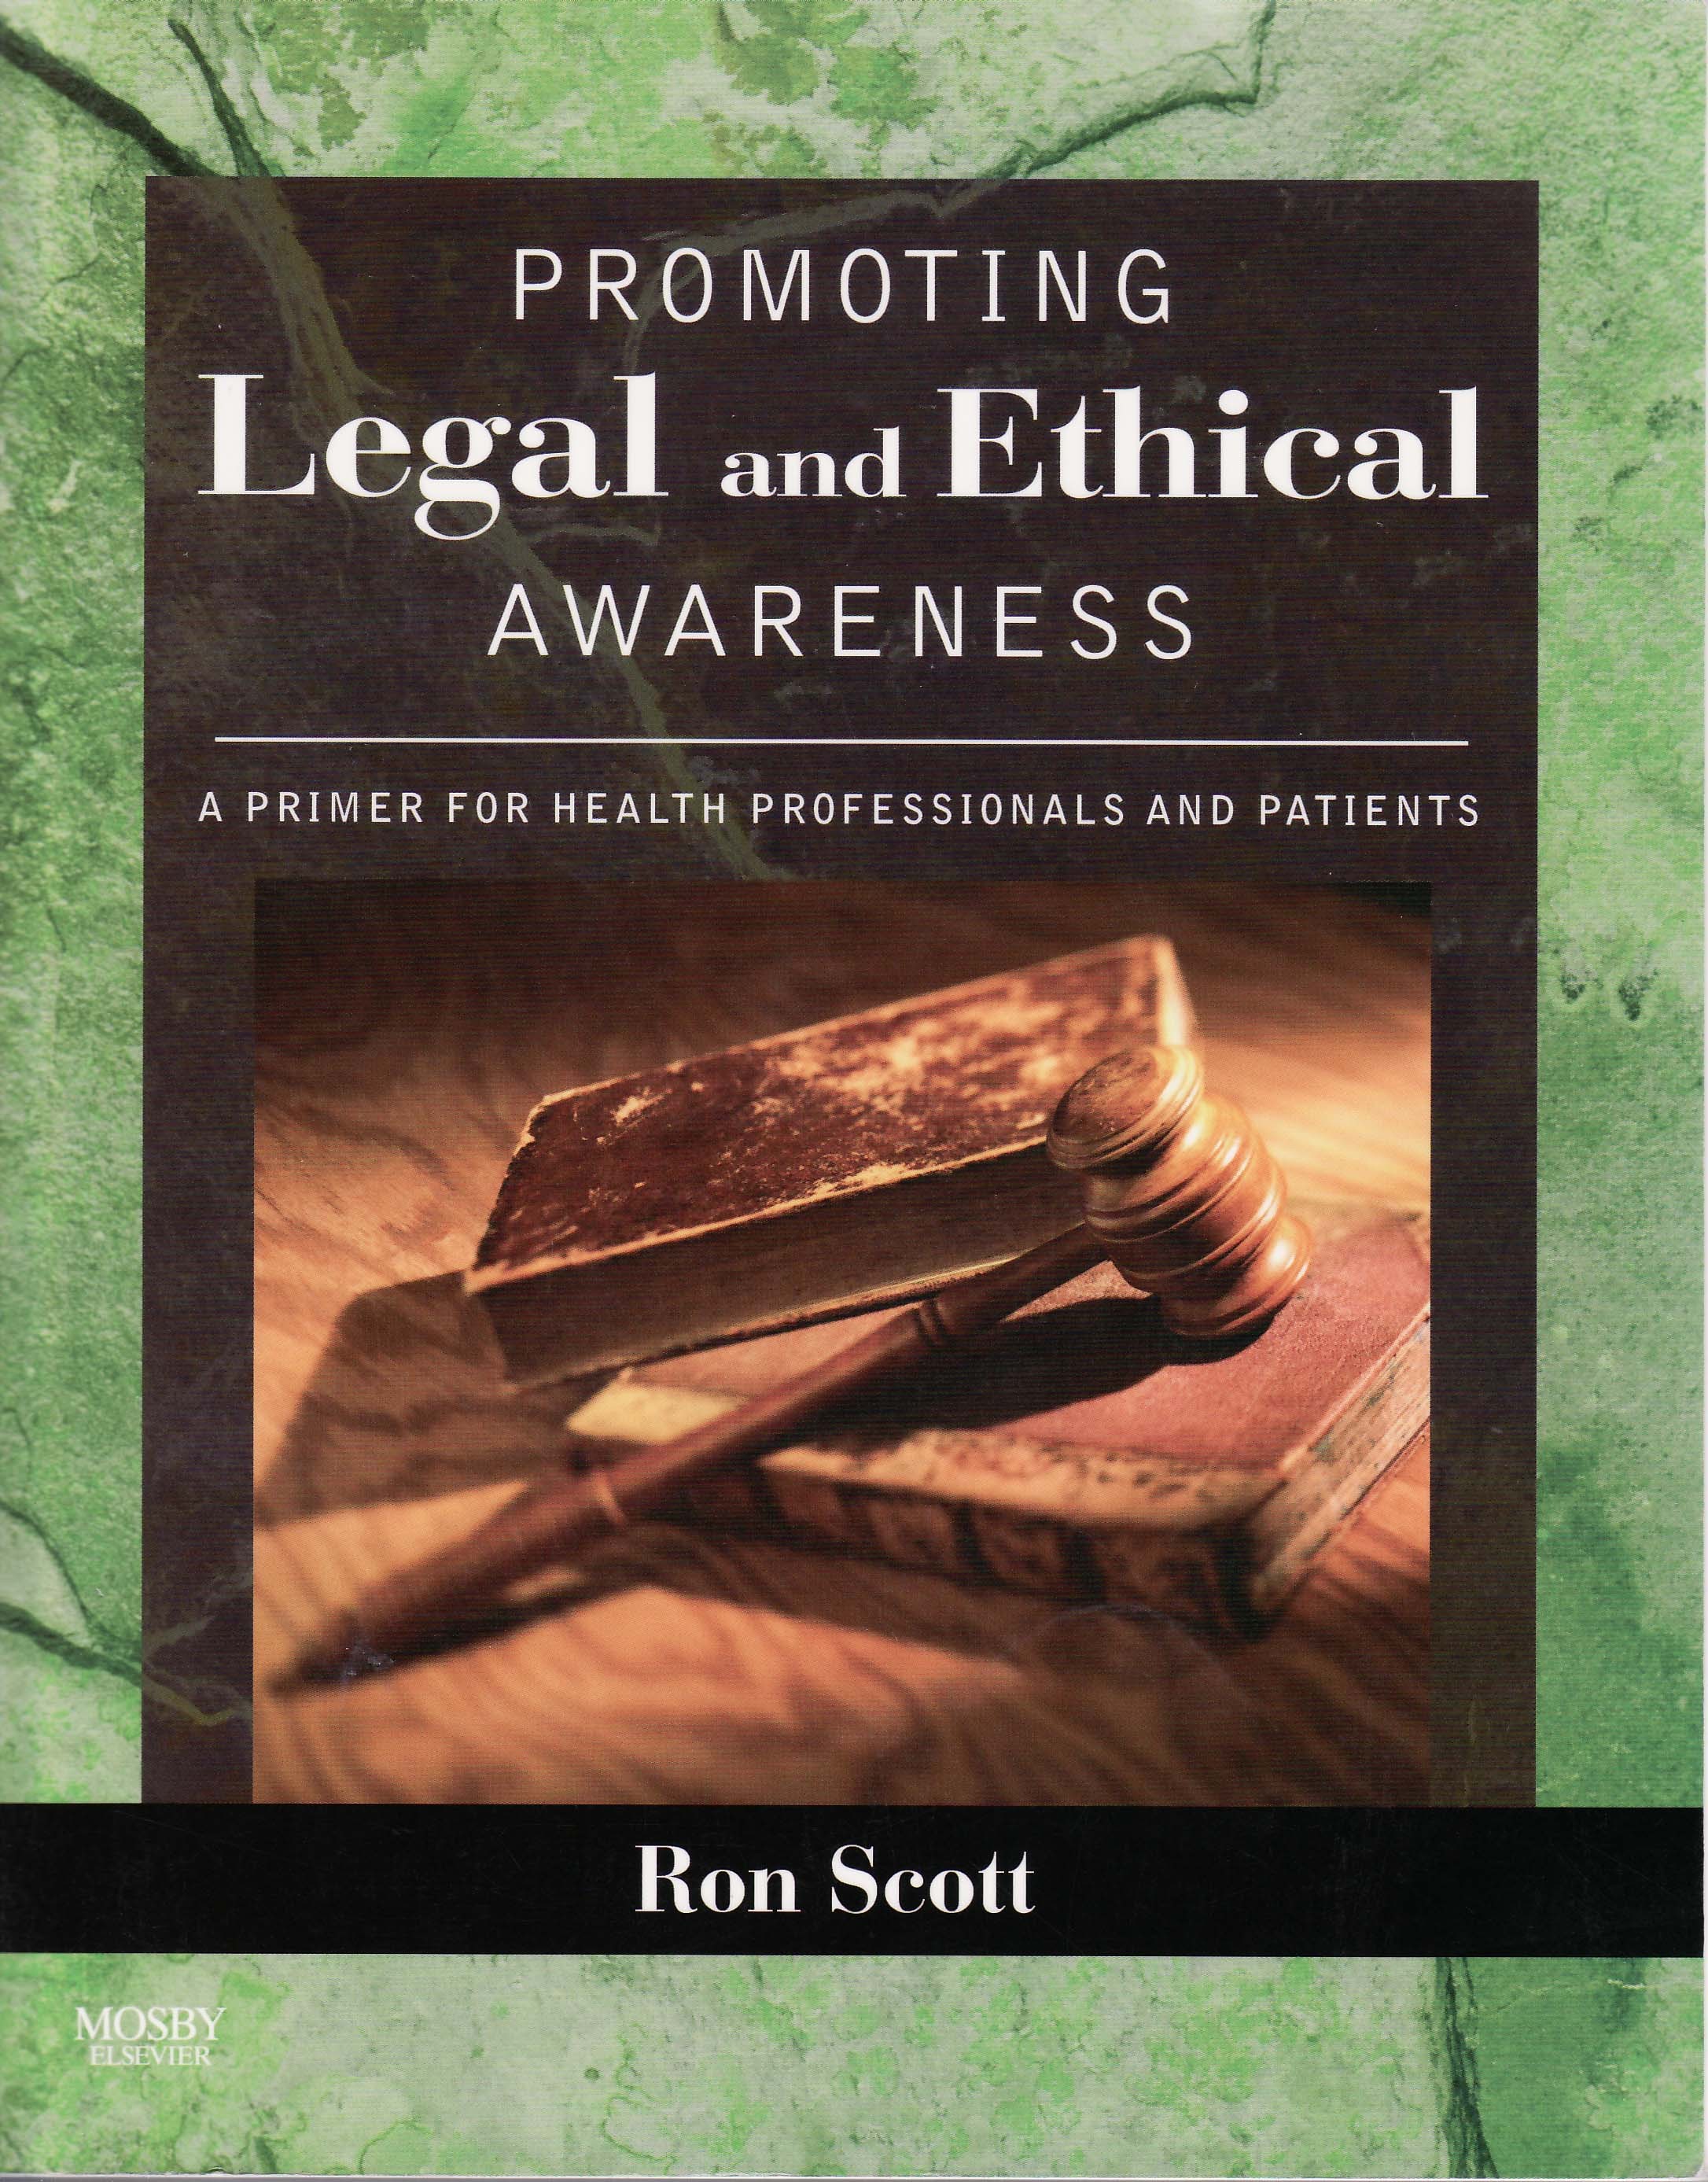 Promoting Legal & Ethical Awareness: Module 1 (Electronic Download)